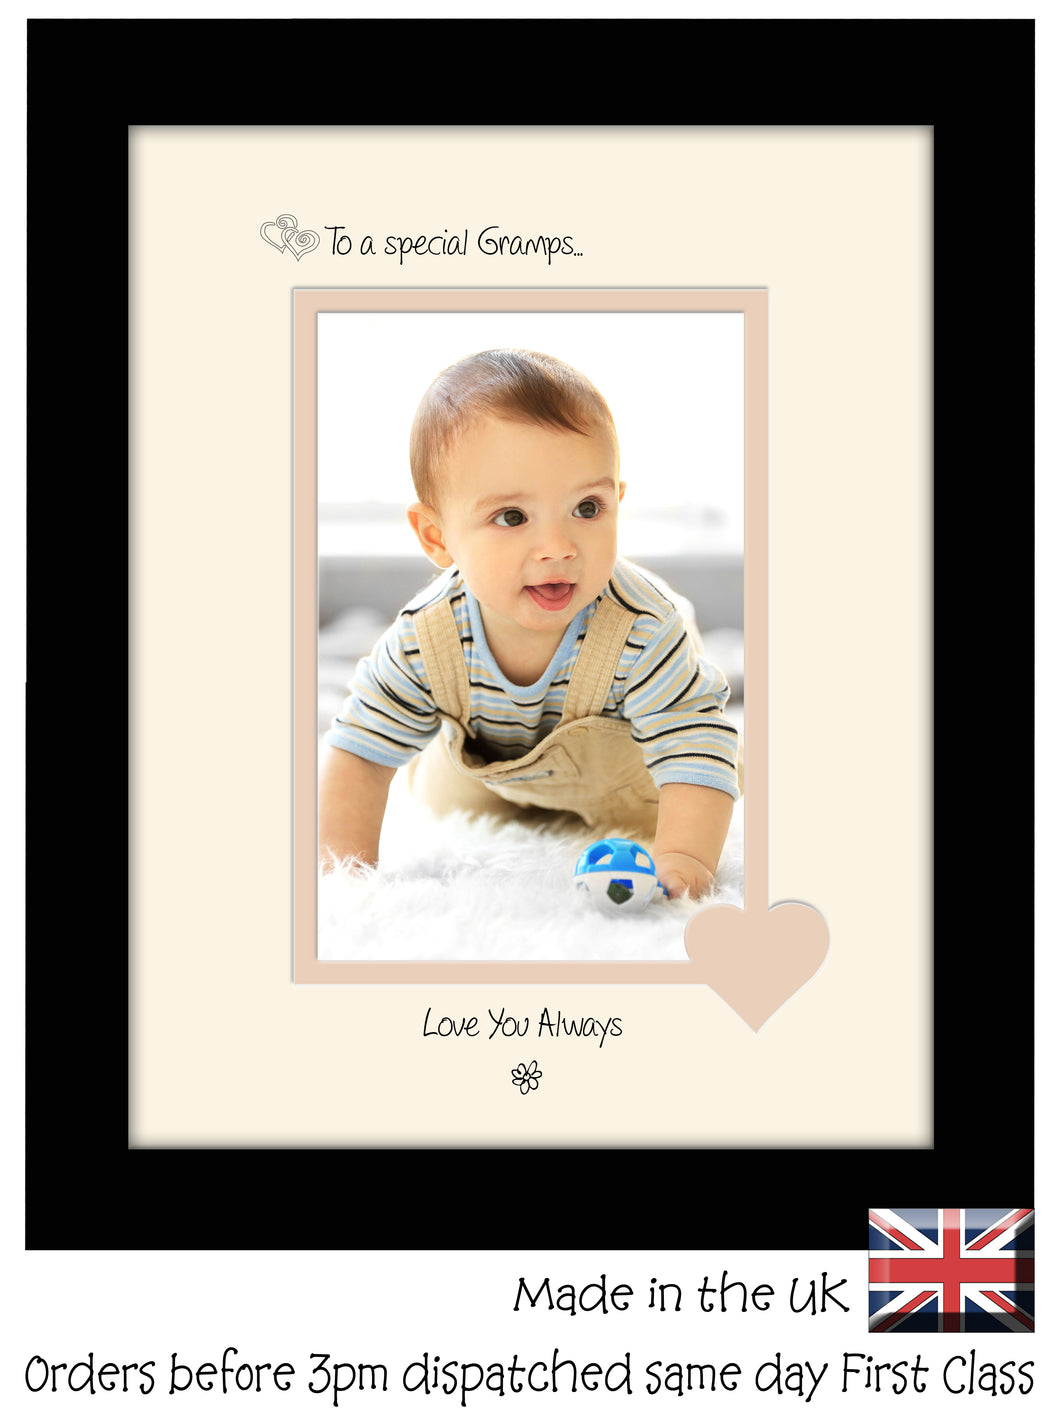 Gramps Photo Frame - To a Special Gramps ... Love you Always Portrait photo frame 6